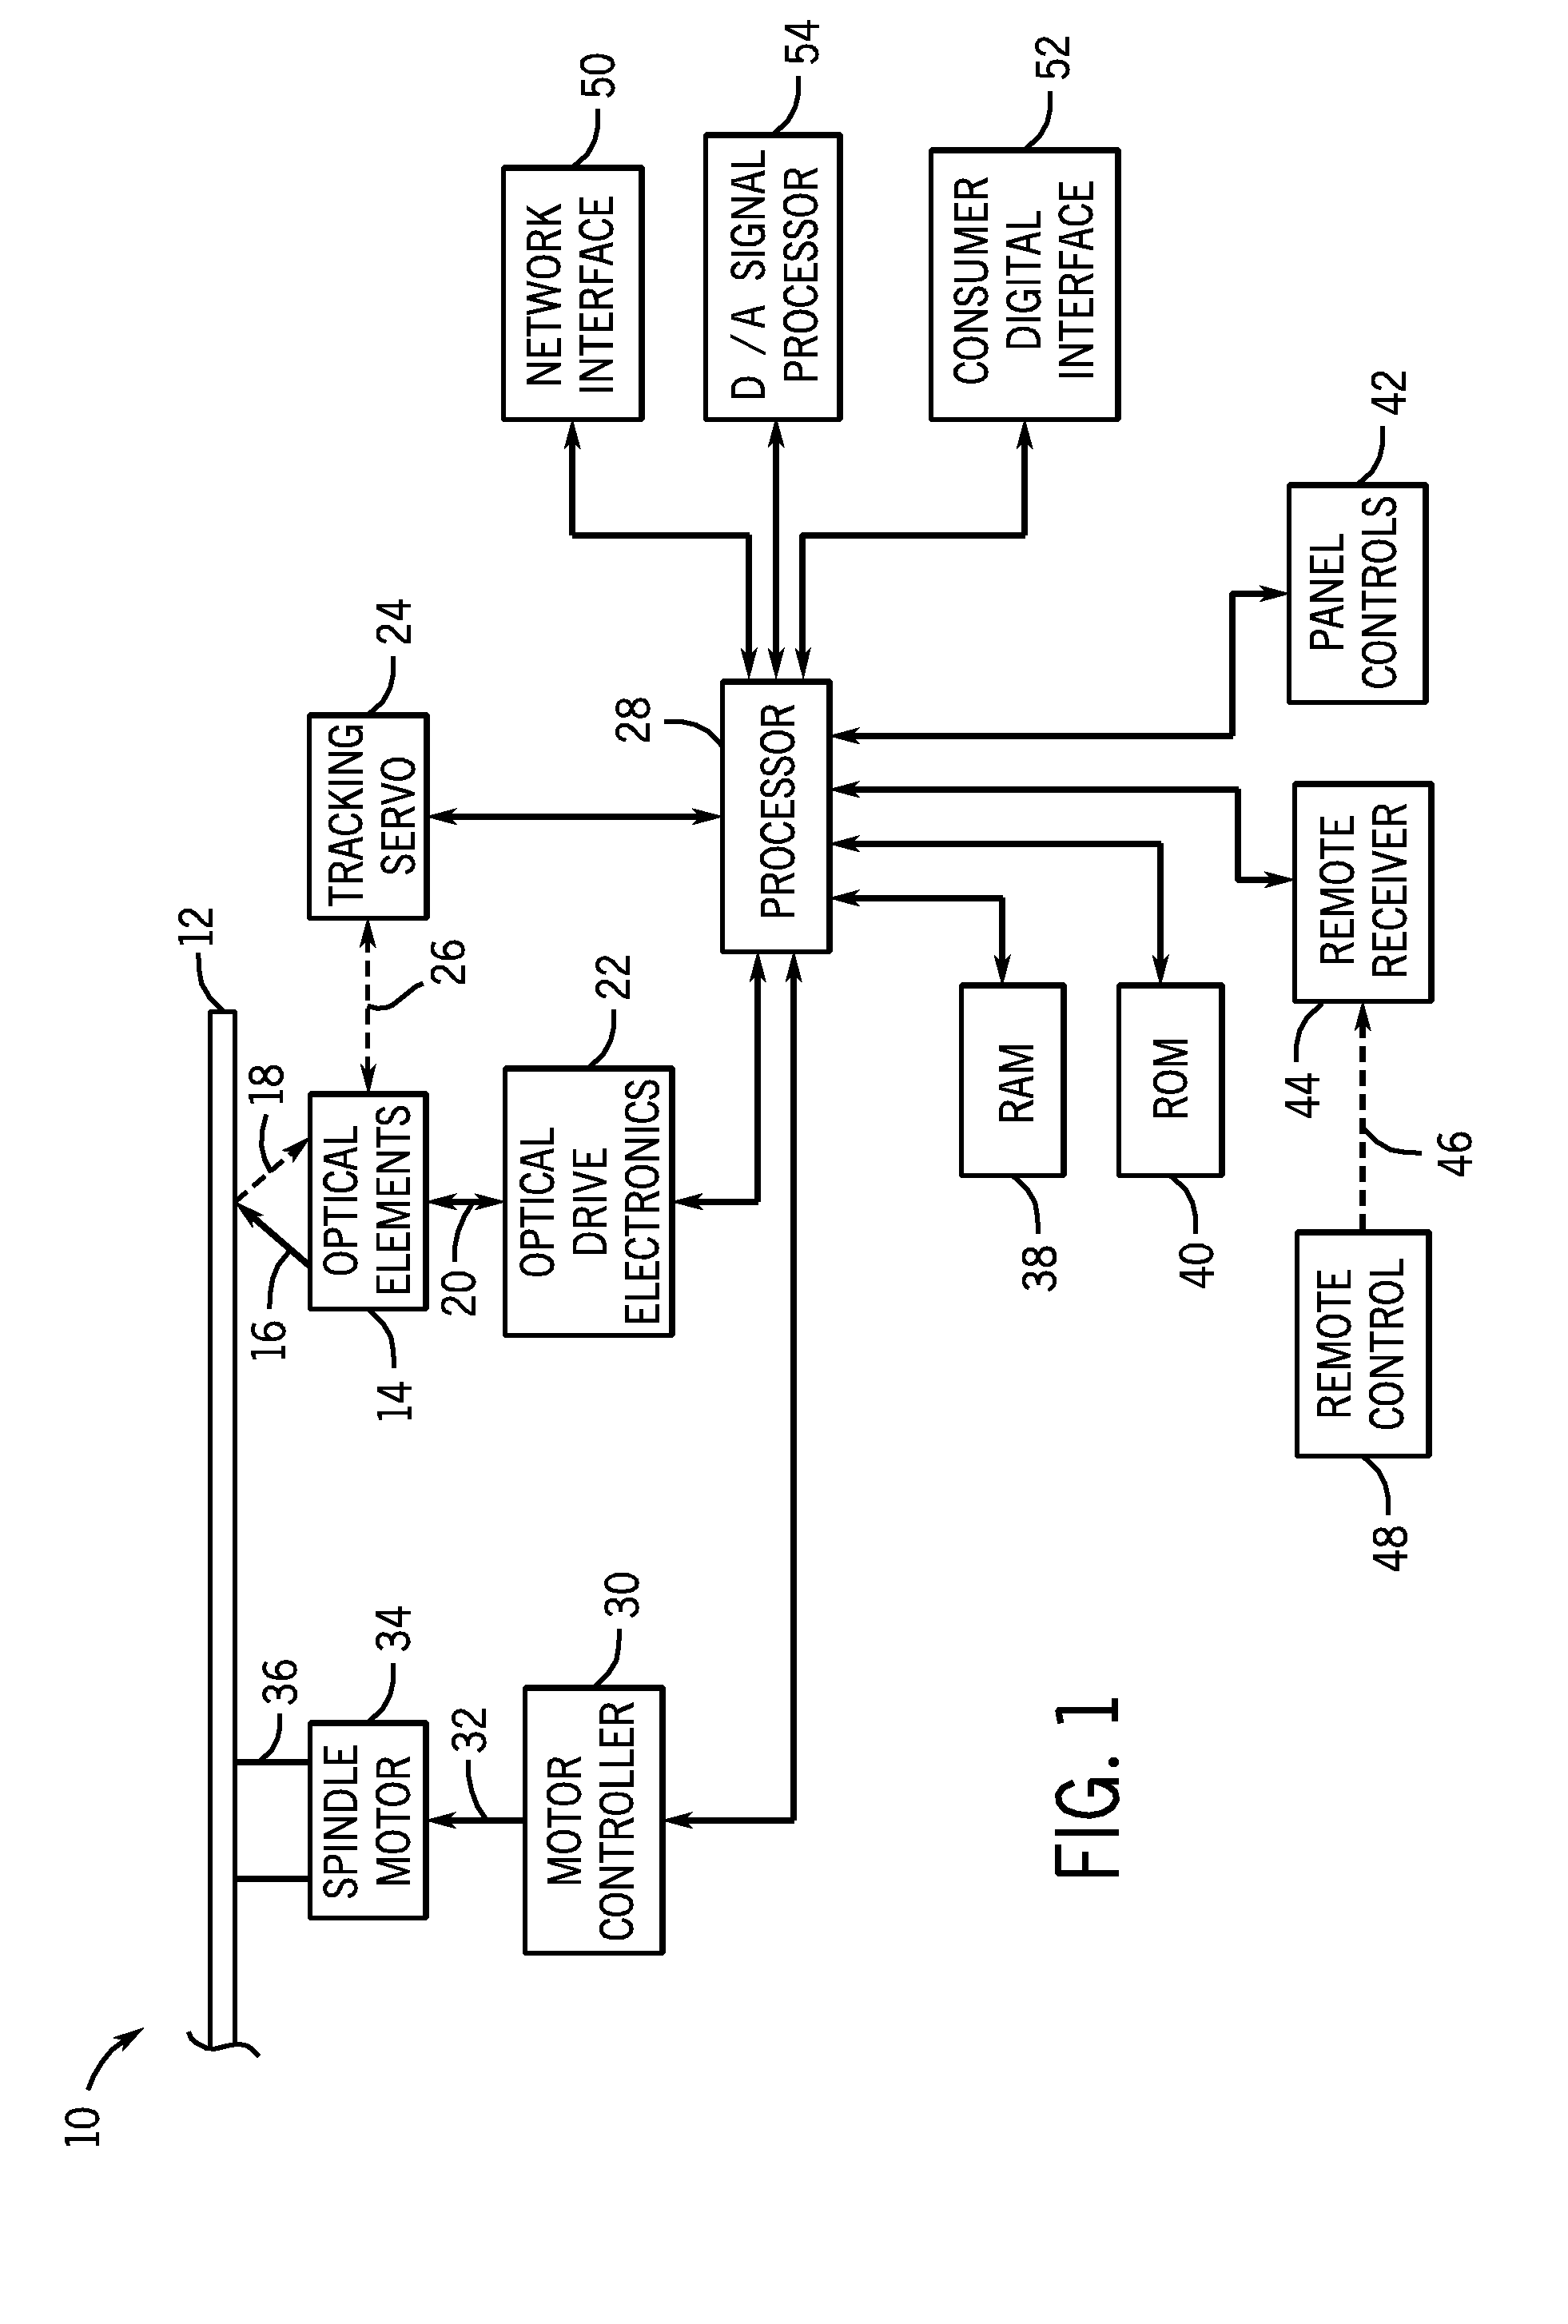 System and method for reading micro-holograms with reduced error rates